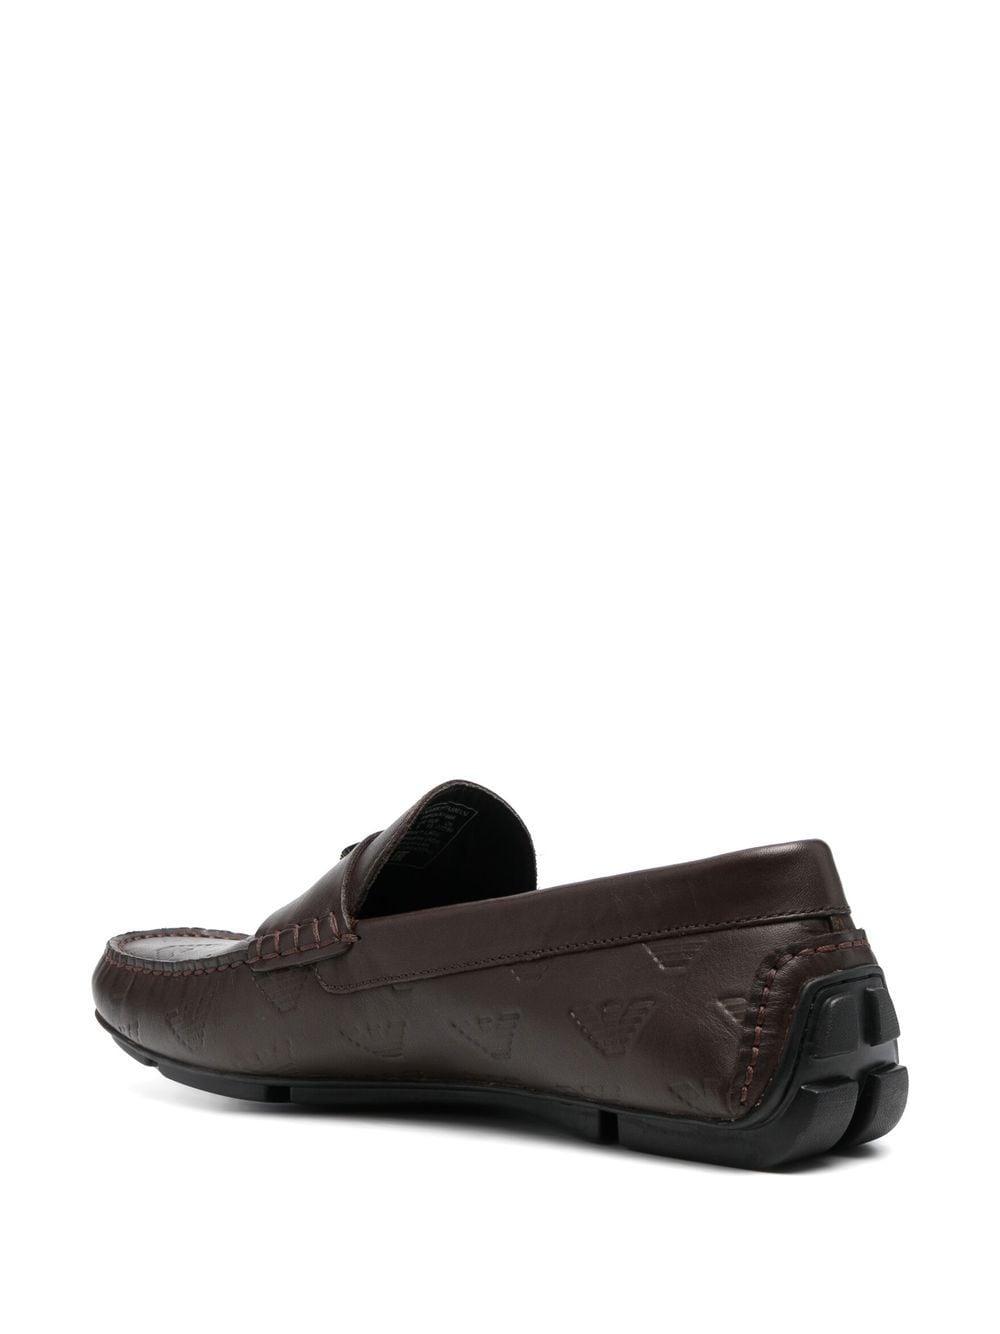 Emporio Armani Logo Embossed Loafers in Gray for Men | Lyst